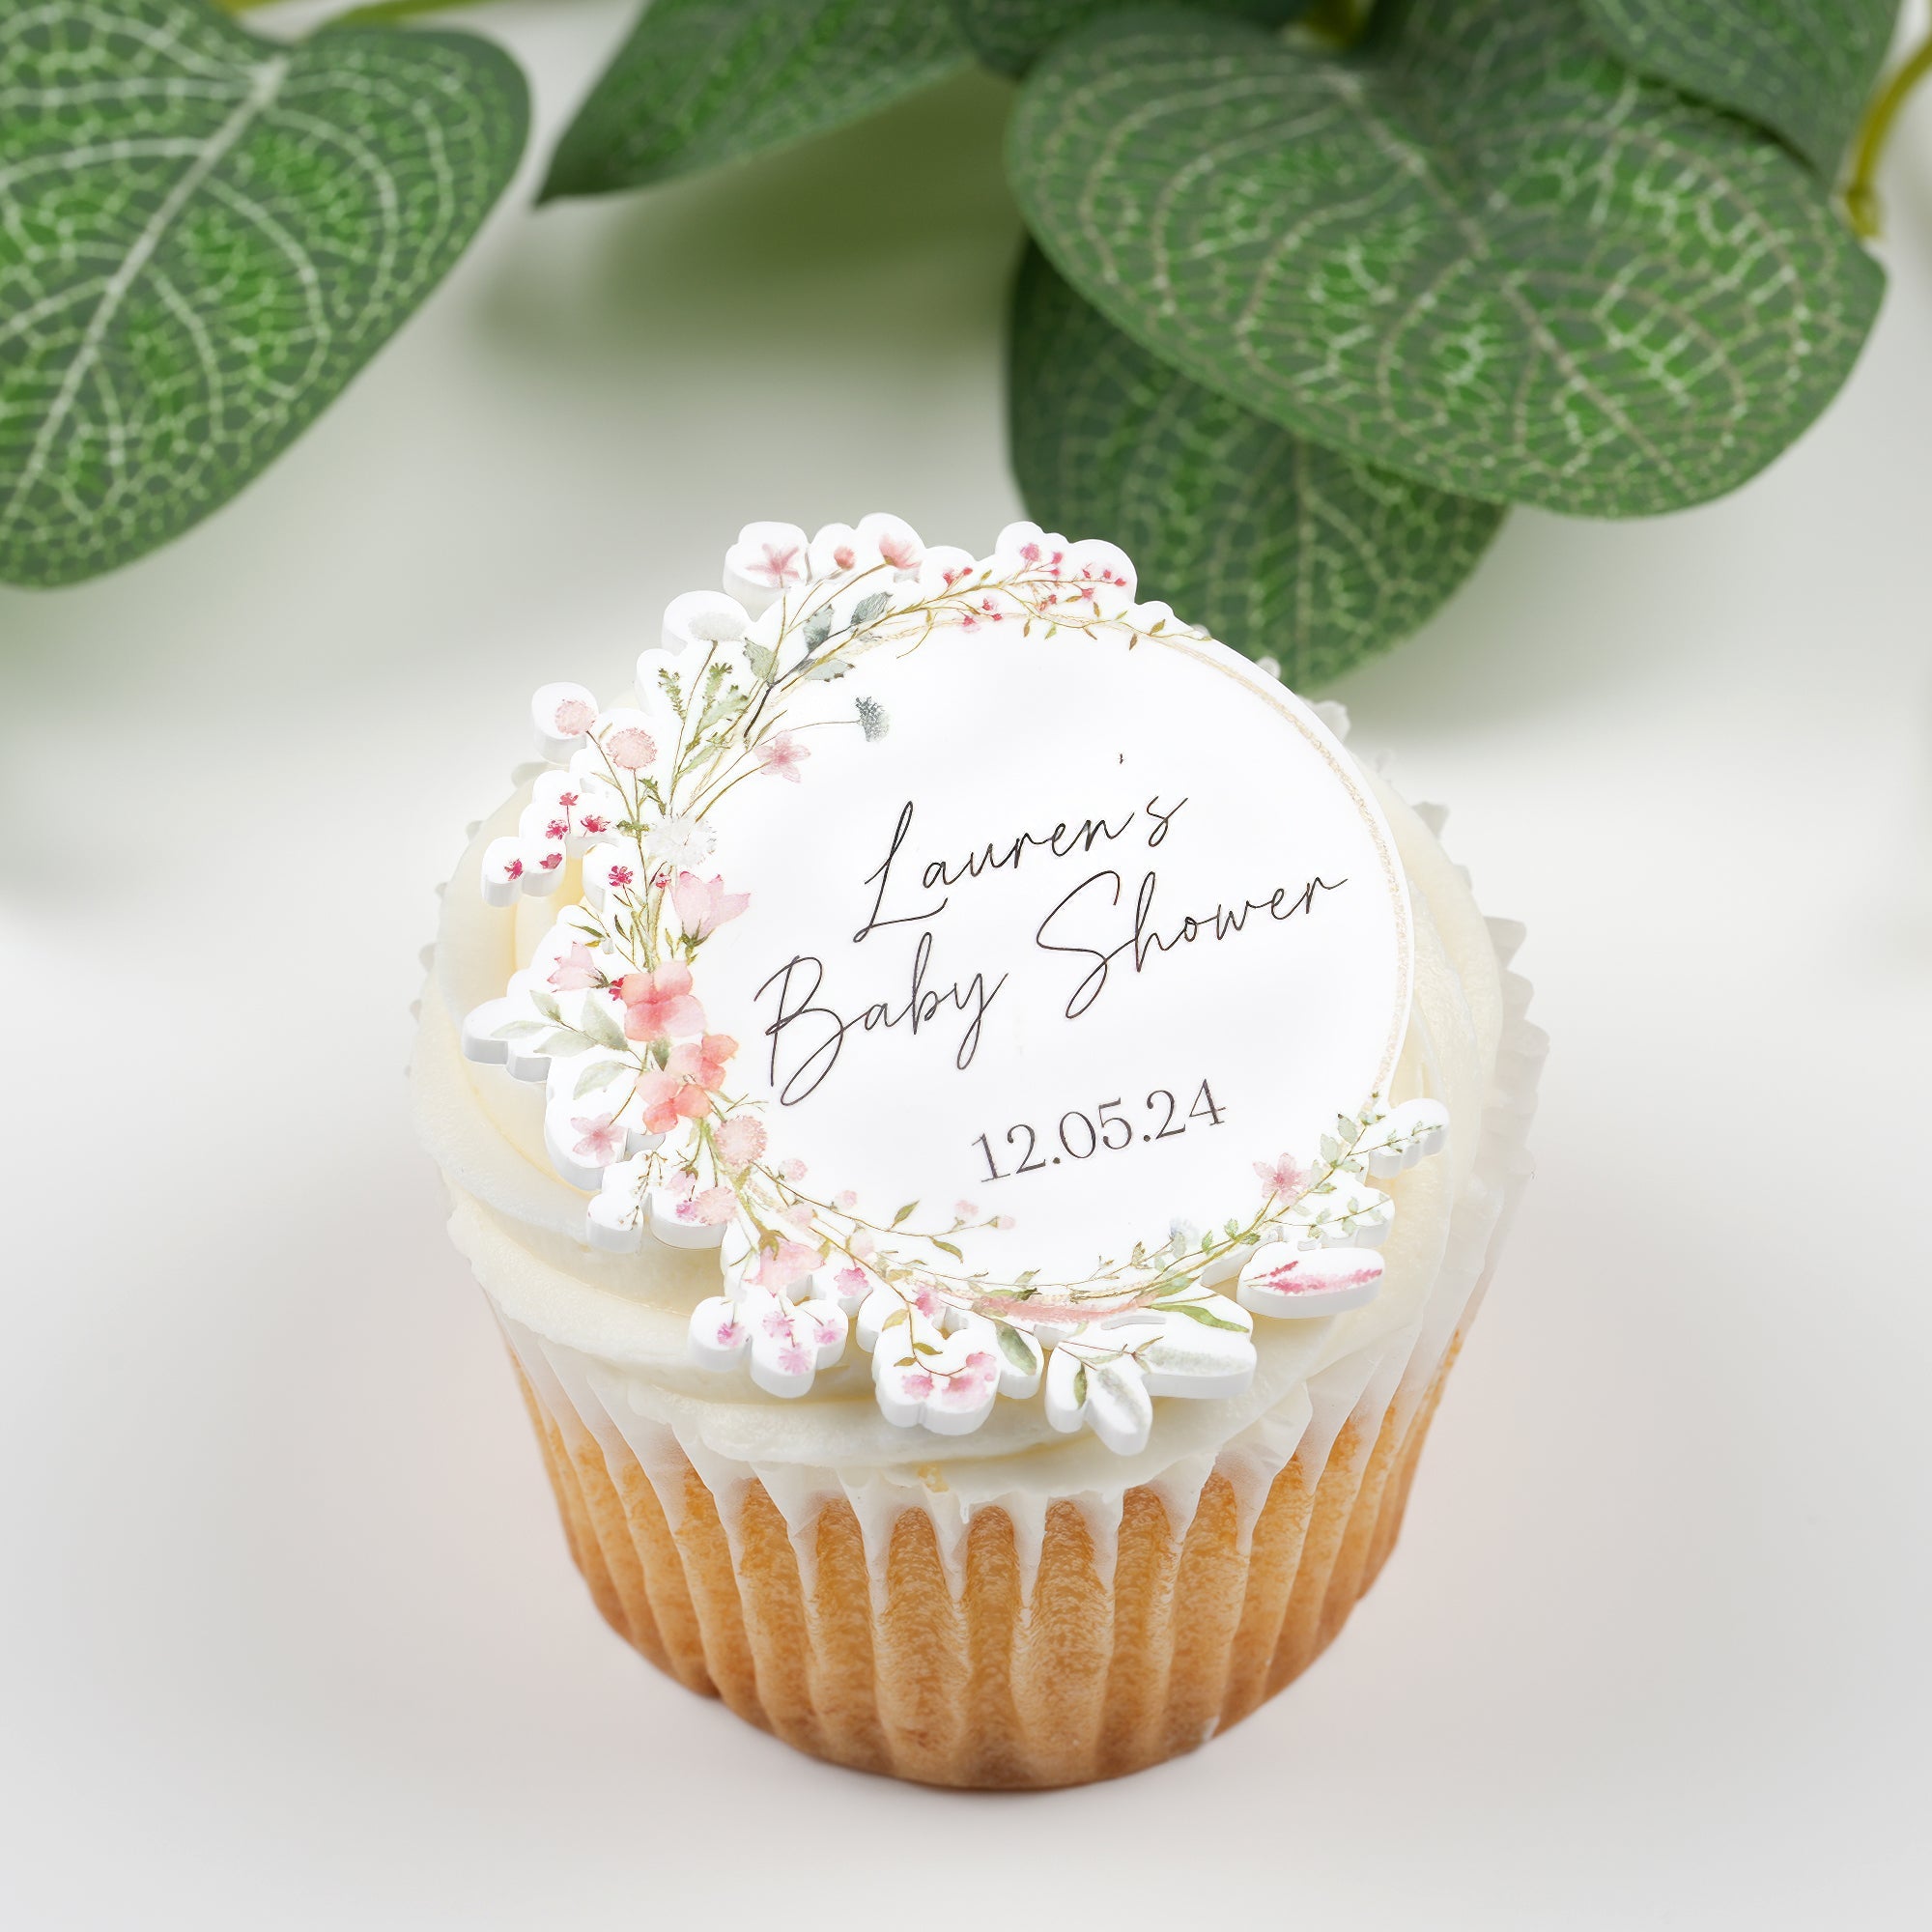 Personalised Acrylic Baby Shower Cupcake Charm Decorations - Cupcake Topper